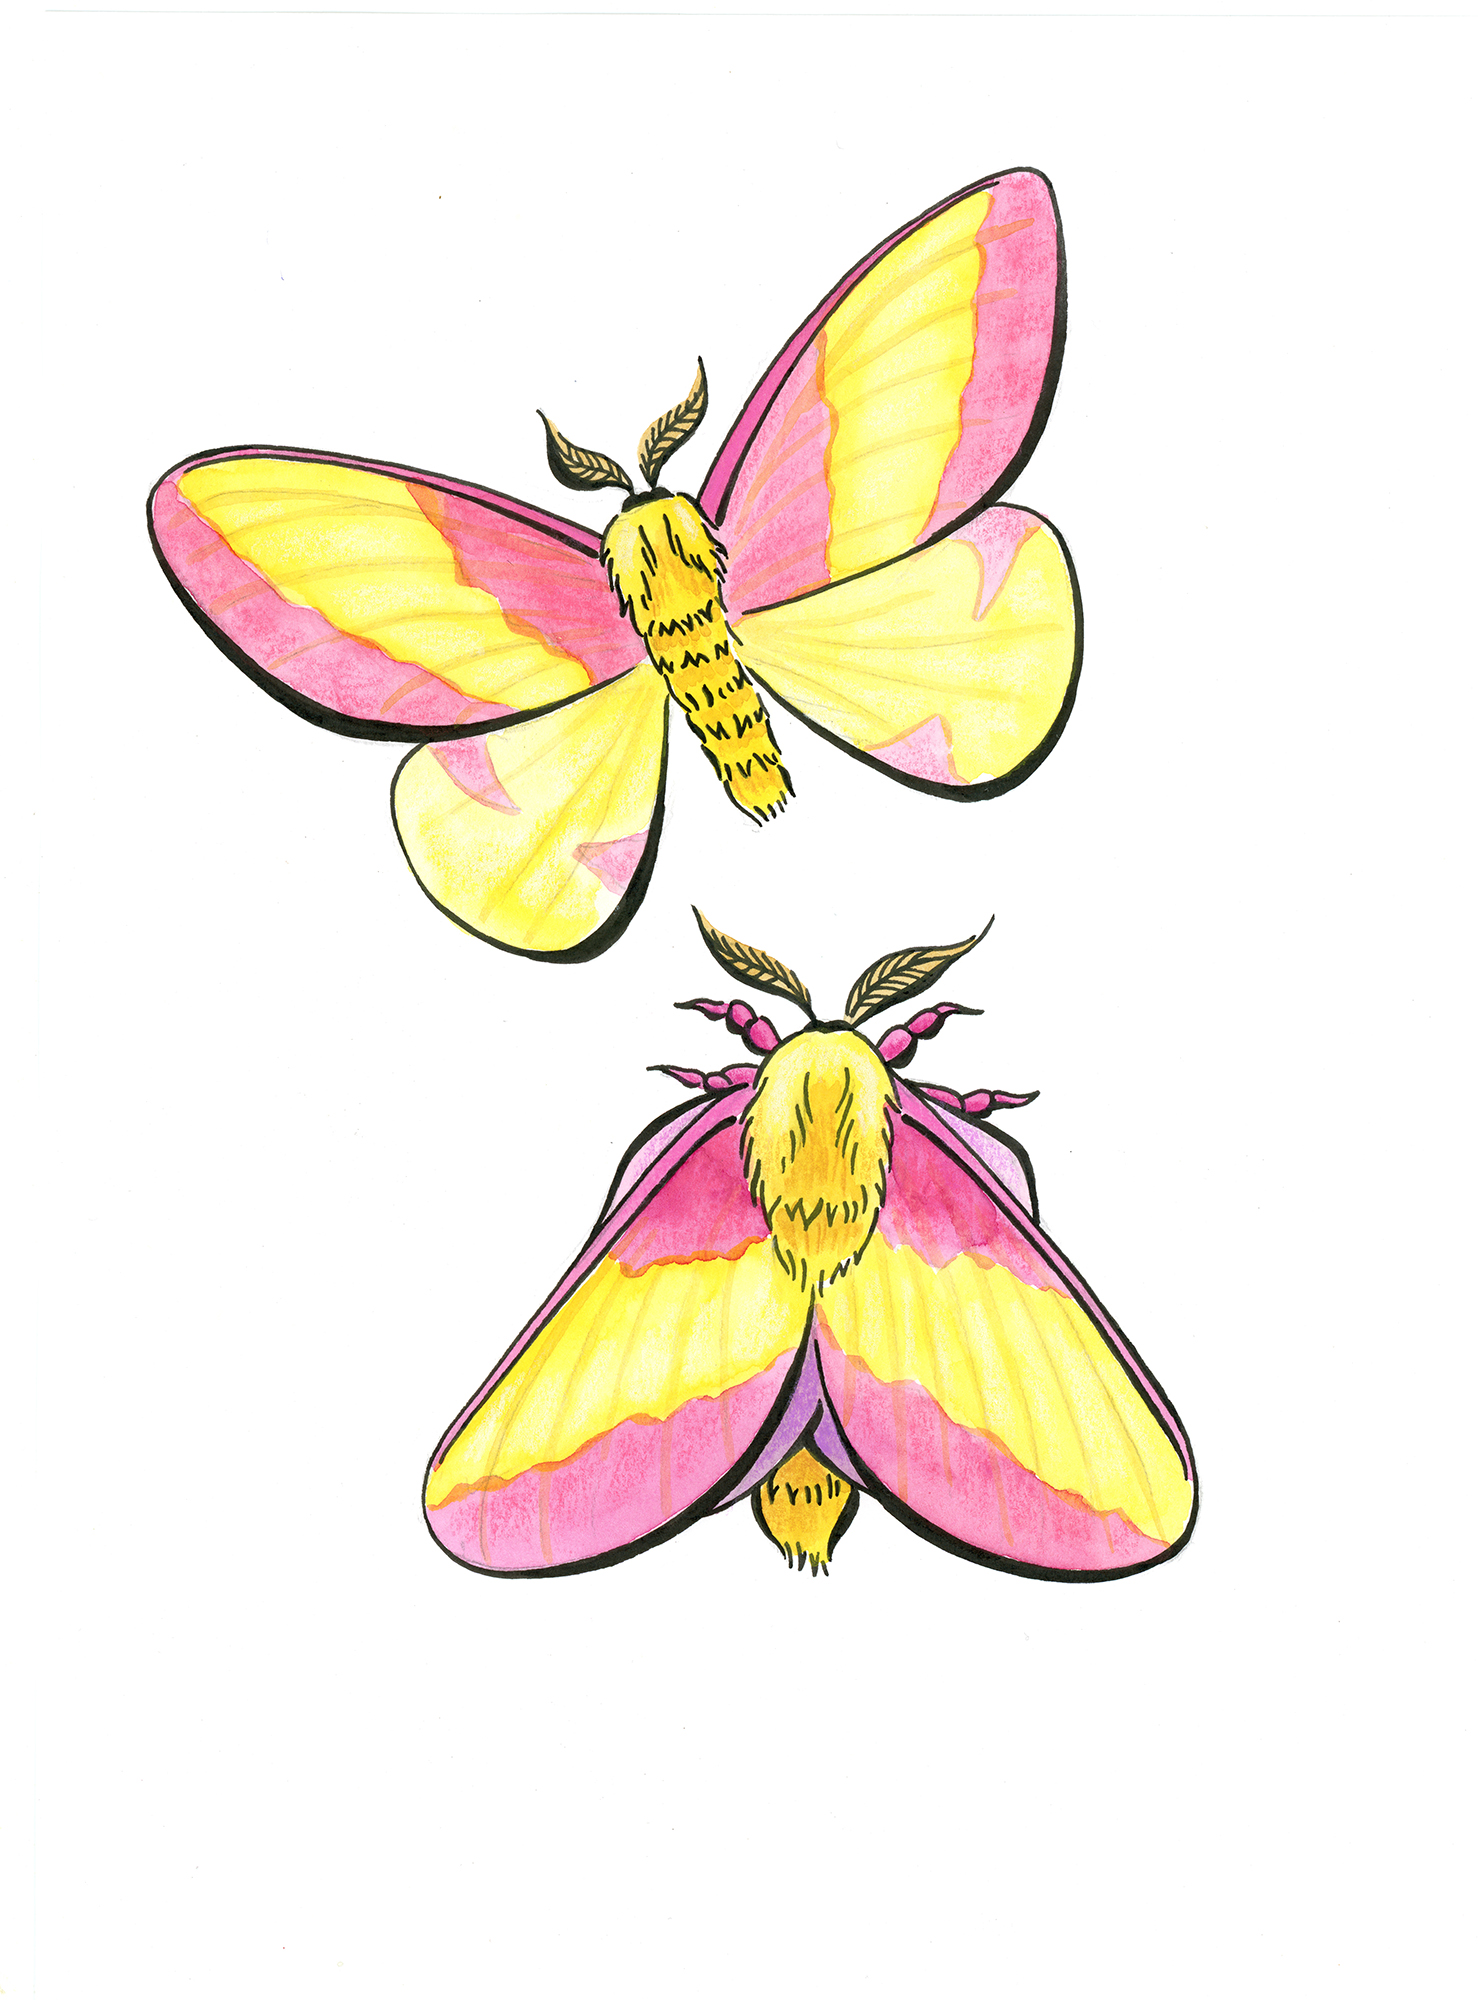 Illustration of pink moths with yellow stripes.